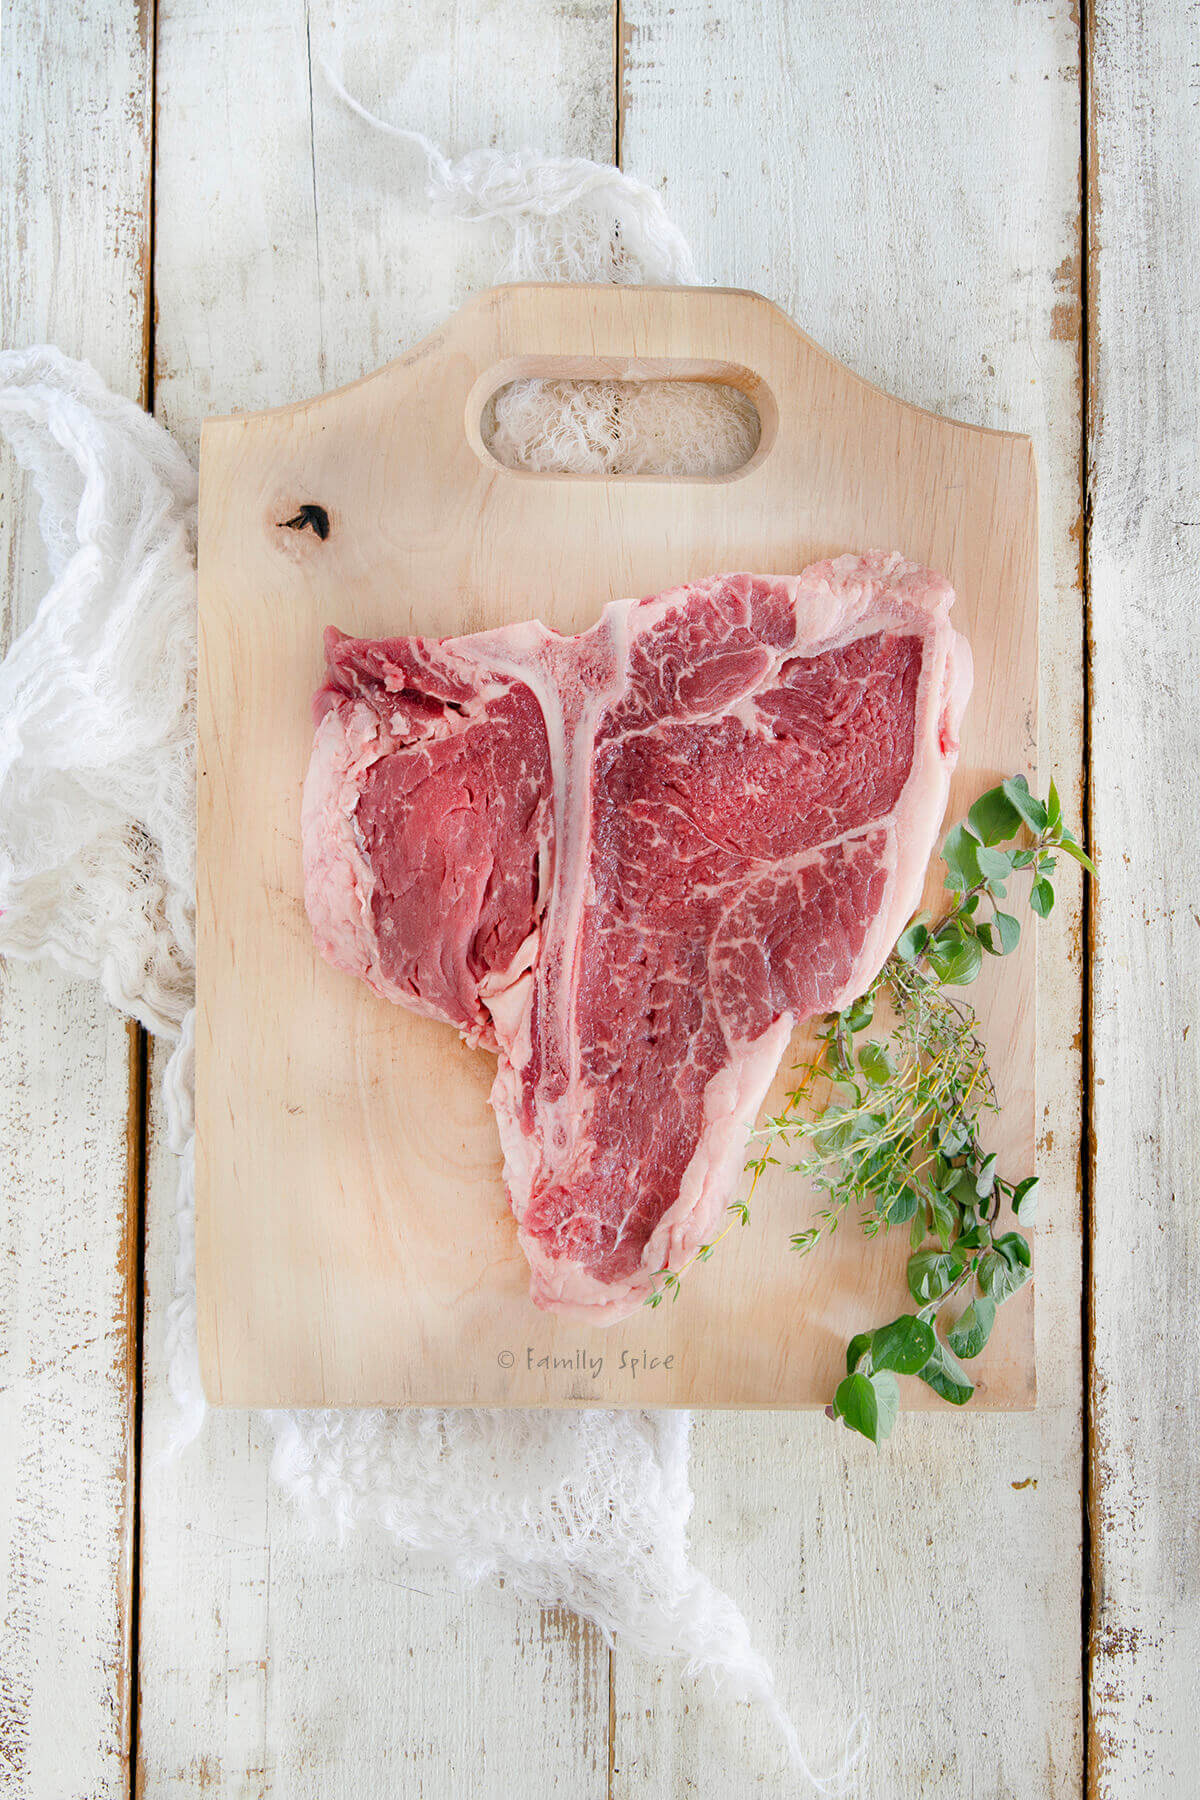 Top view of a raw porterhouse steak on a cutting board with fresh herbs next to it